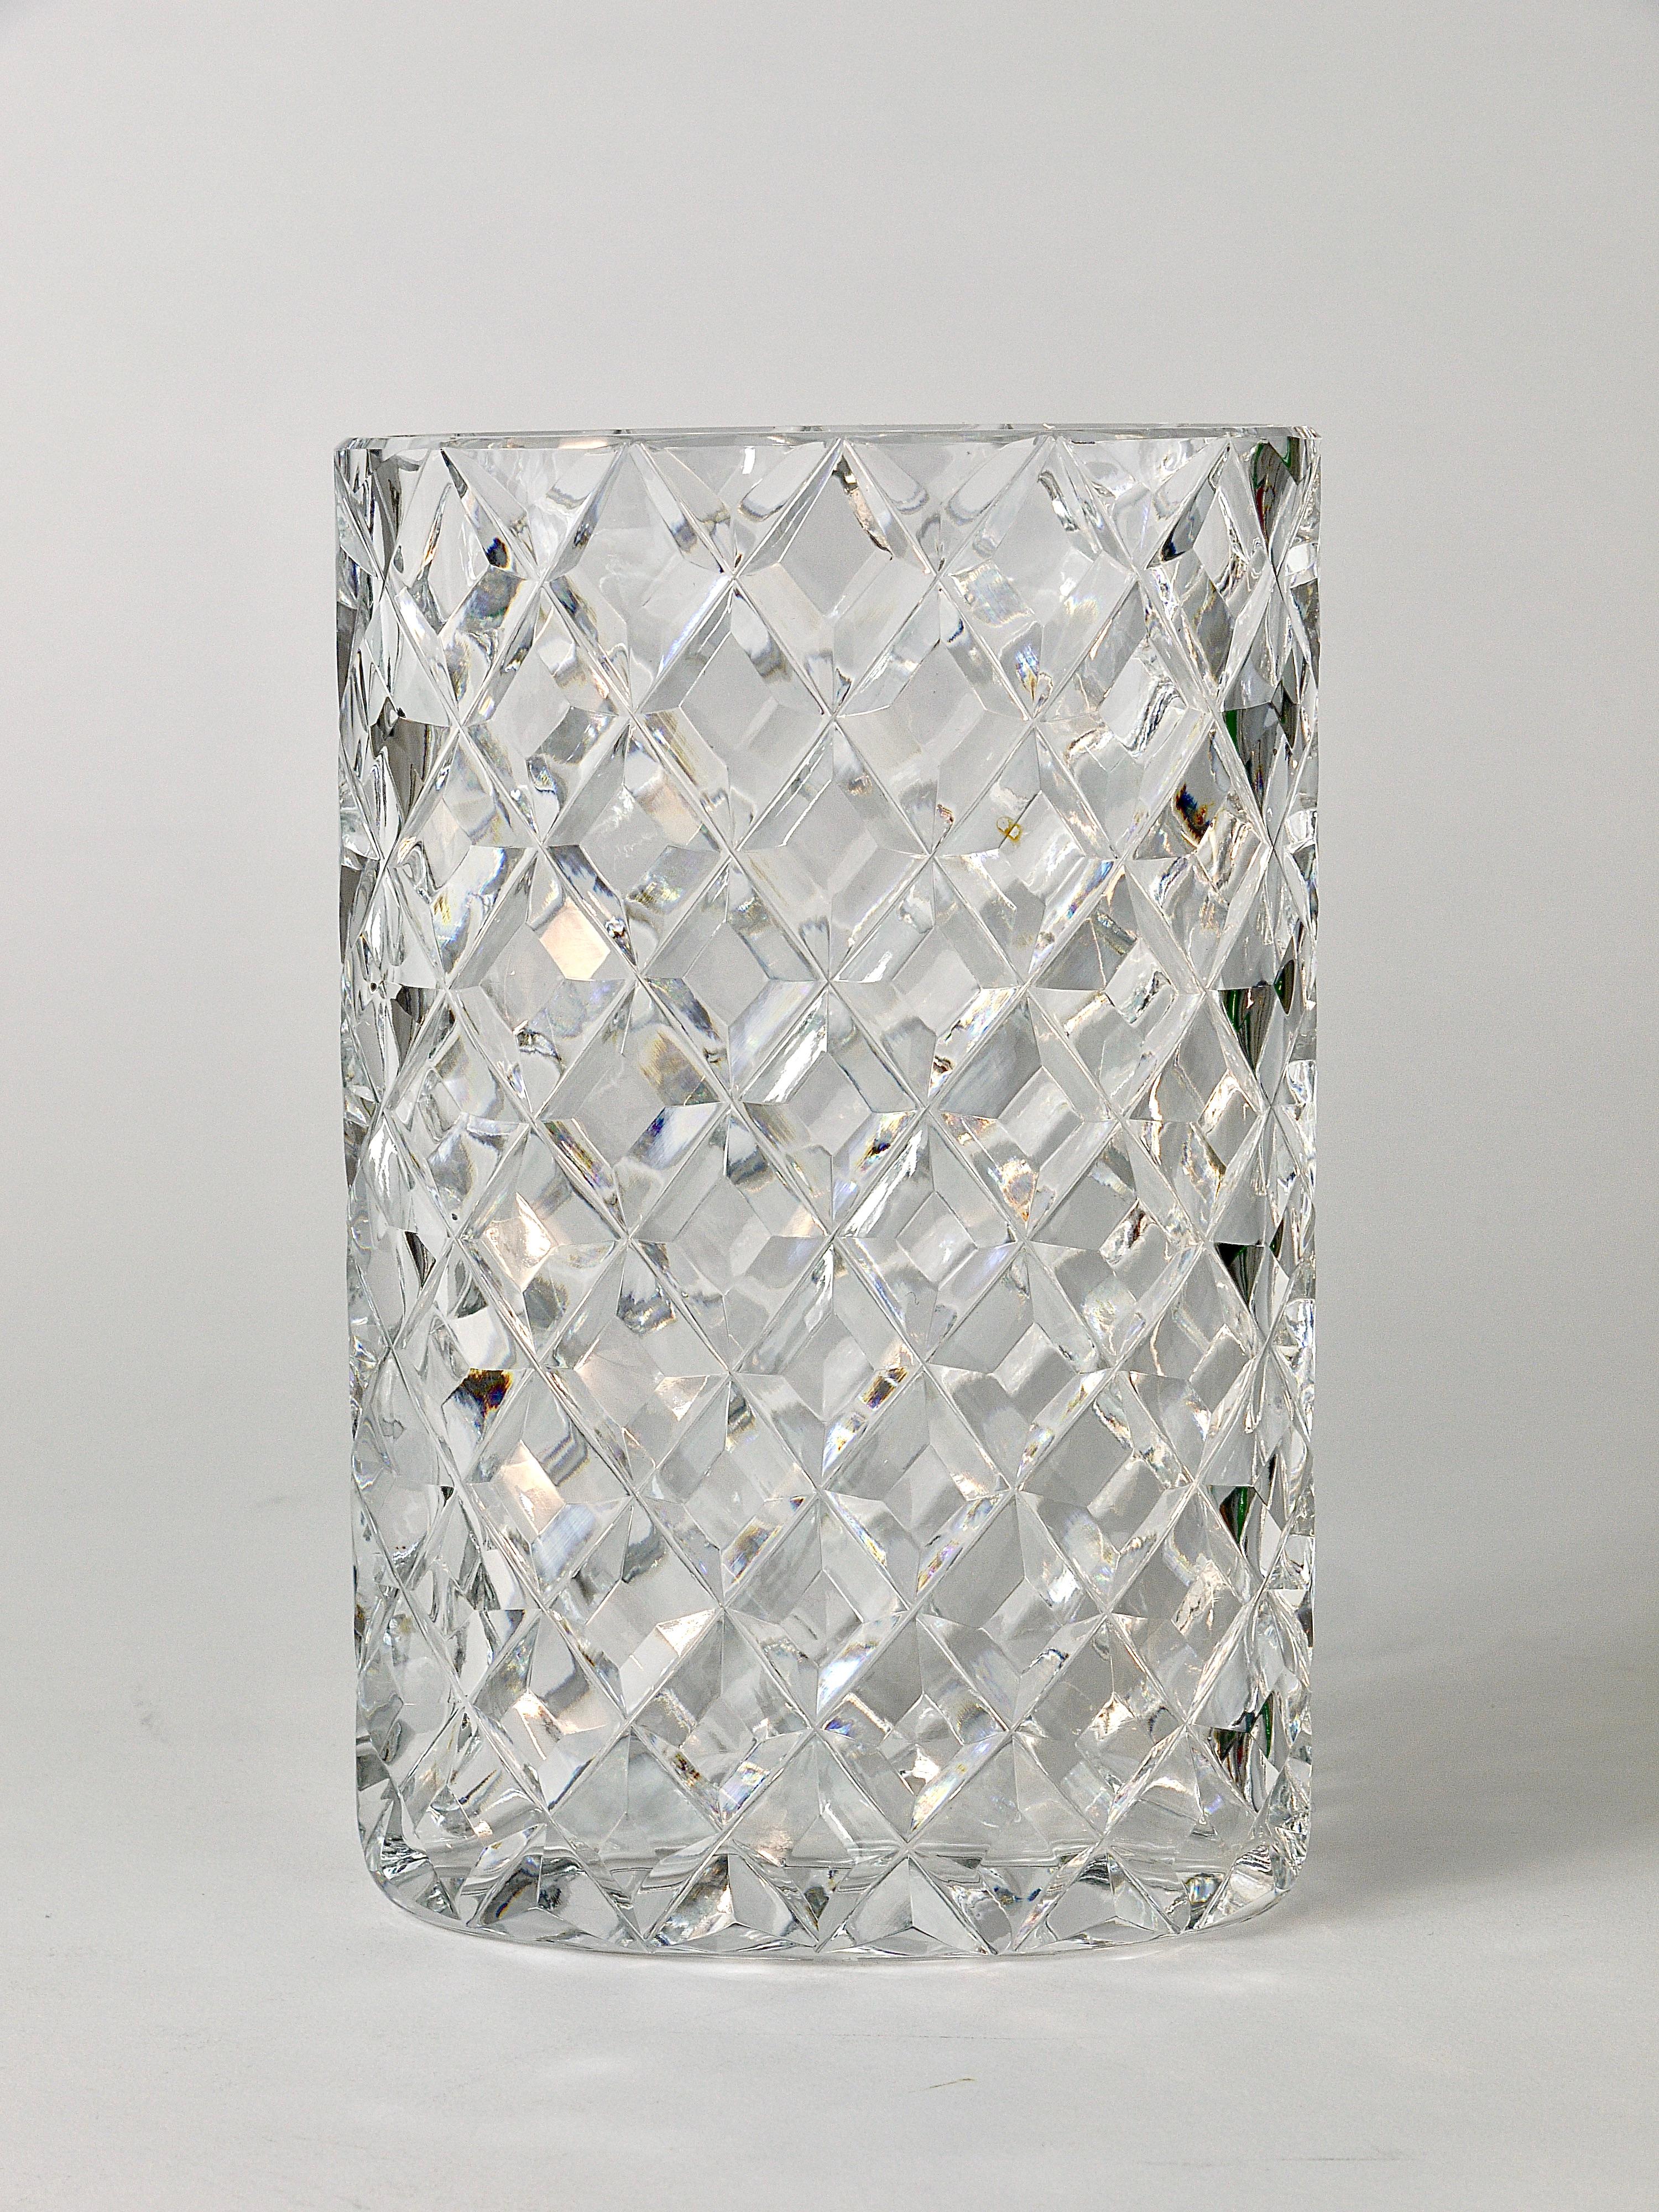 Sparkling Facetted Crystal Glass Vase by Claus Josef Riedel, Austria, 1970s For Sale 11